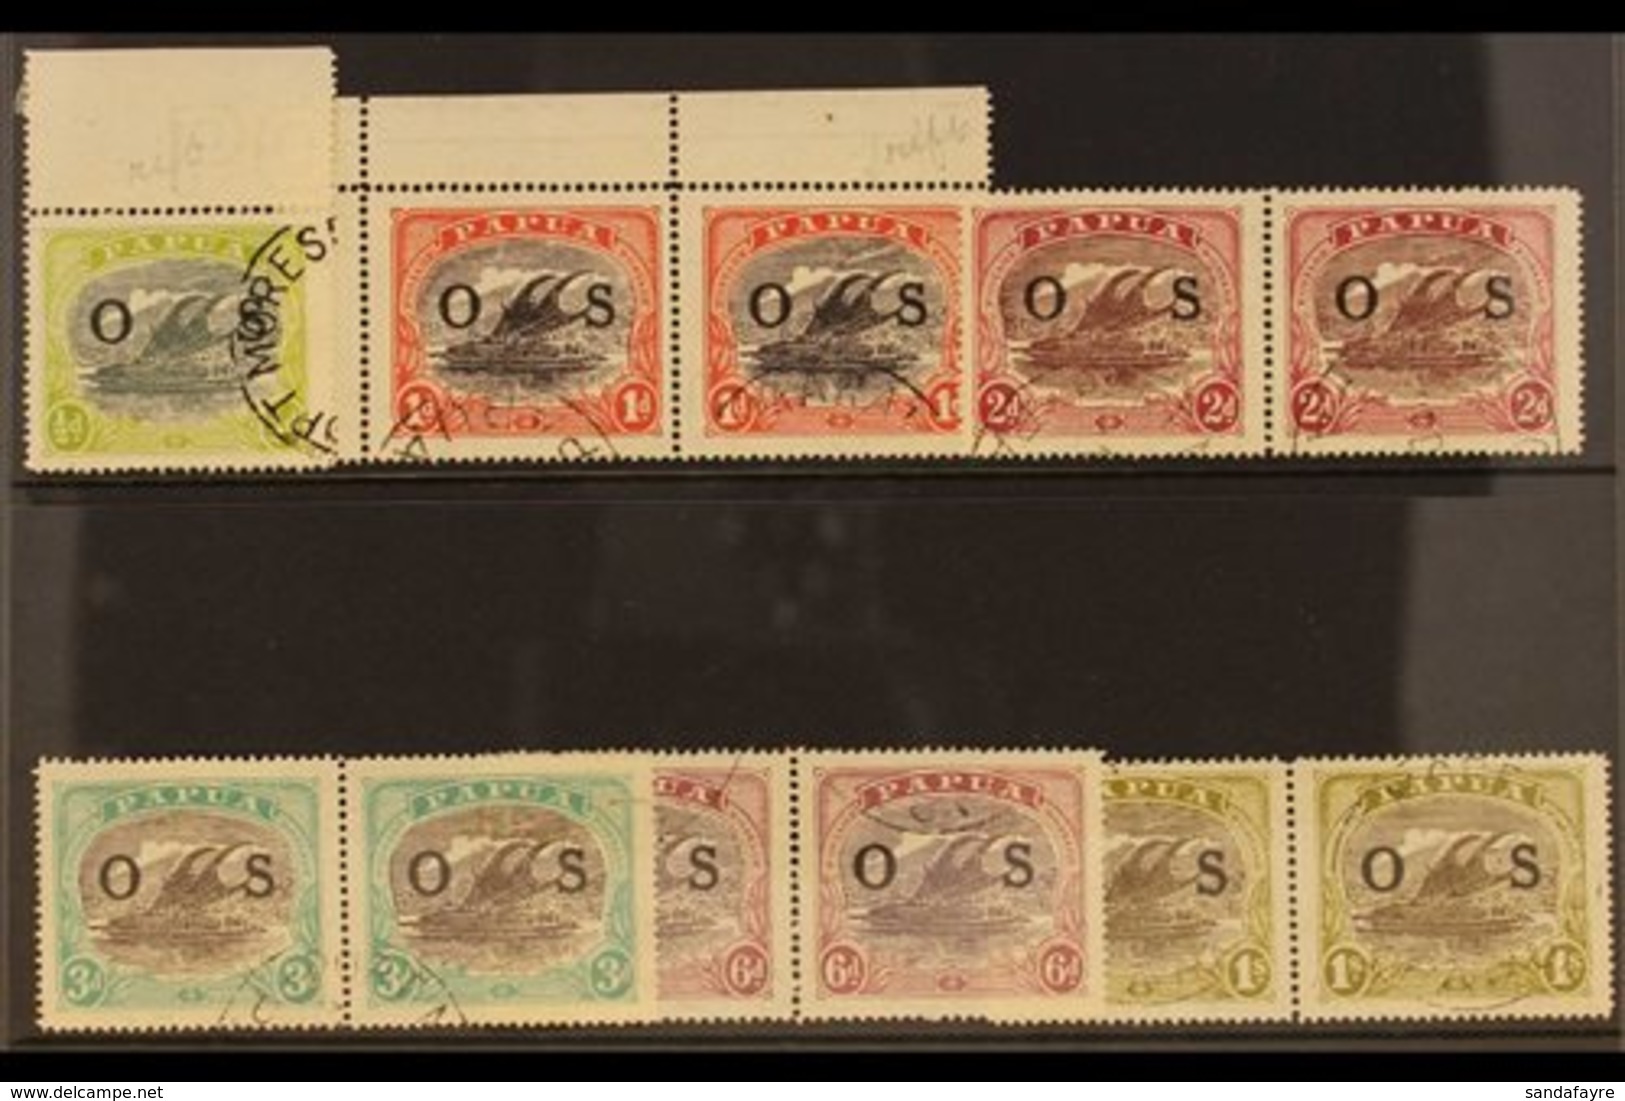 OFFICIALS WITH "RIFT IN CLOUD" FLAW  1931-32. VARIETIES. An "O S" Overprinted Fine Used Range Bearing "RIFT IN CLOUD"  V - Papua New Guinea